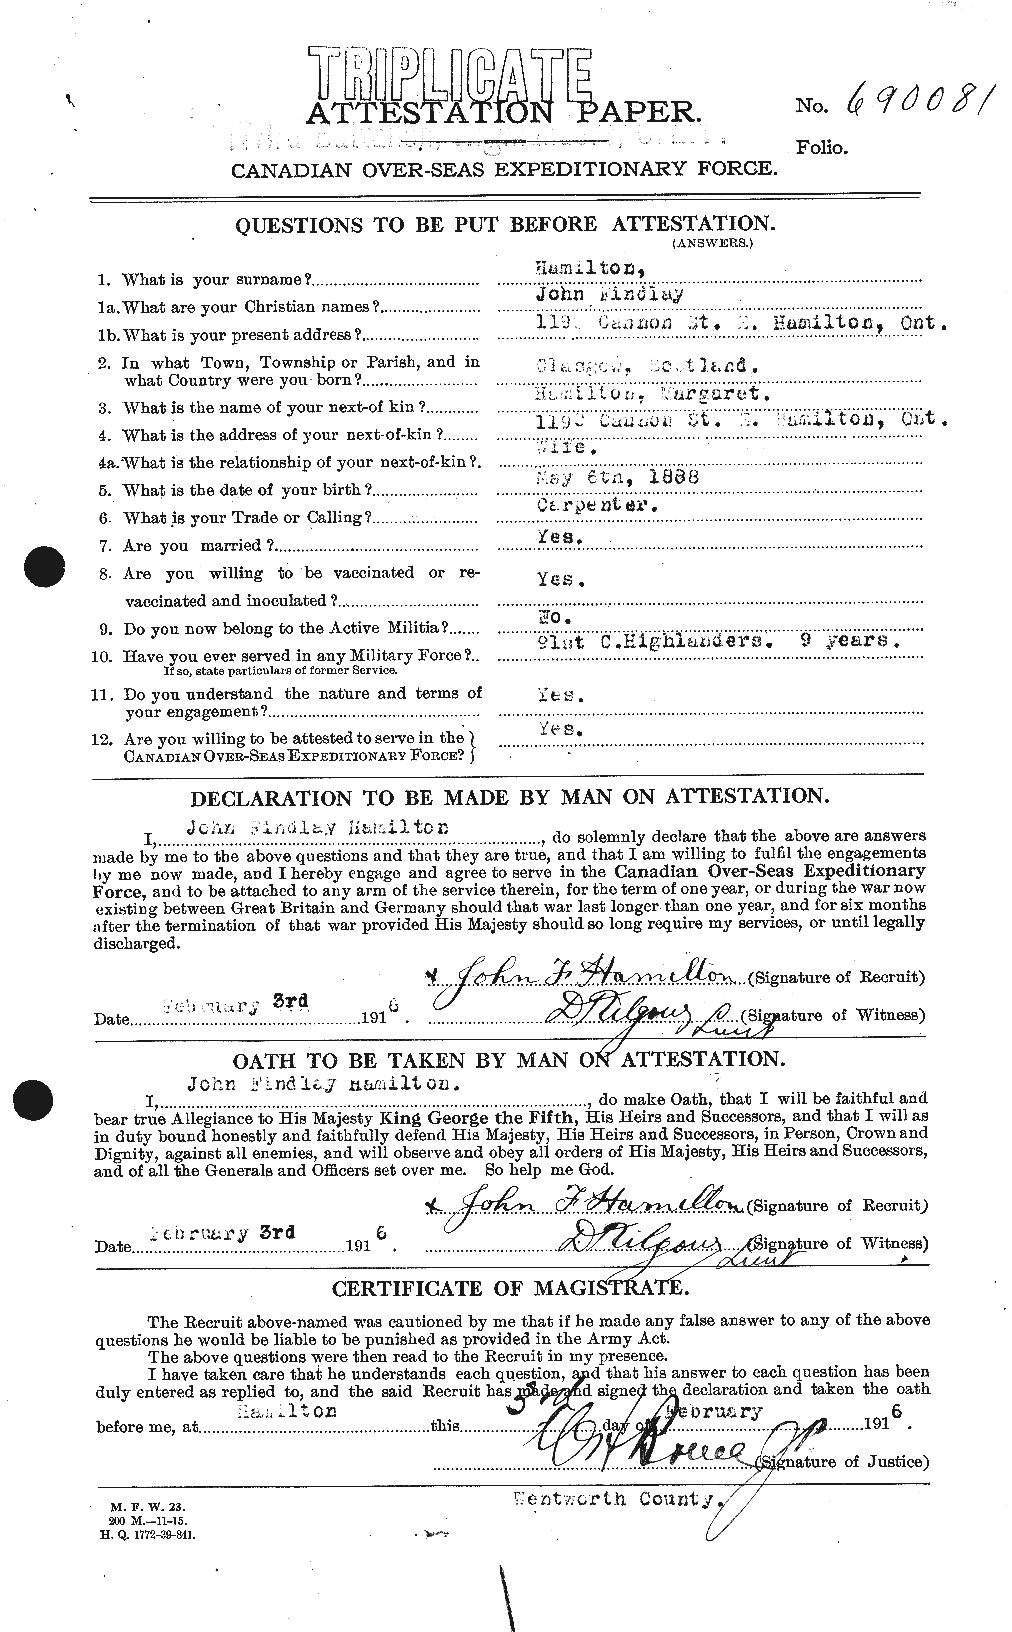 Personnel Records of the First World War - CEF 373082a